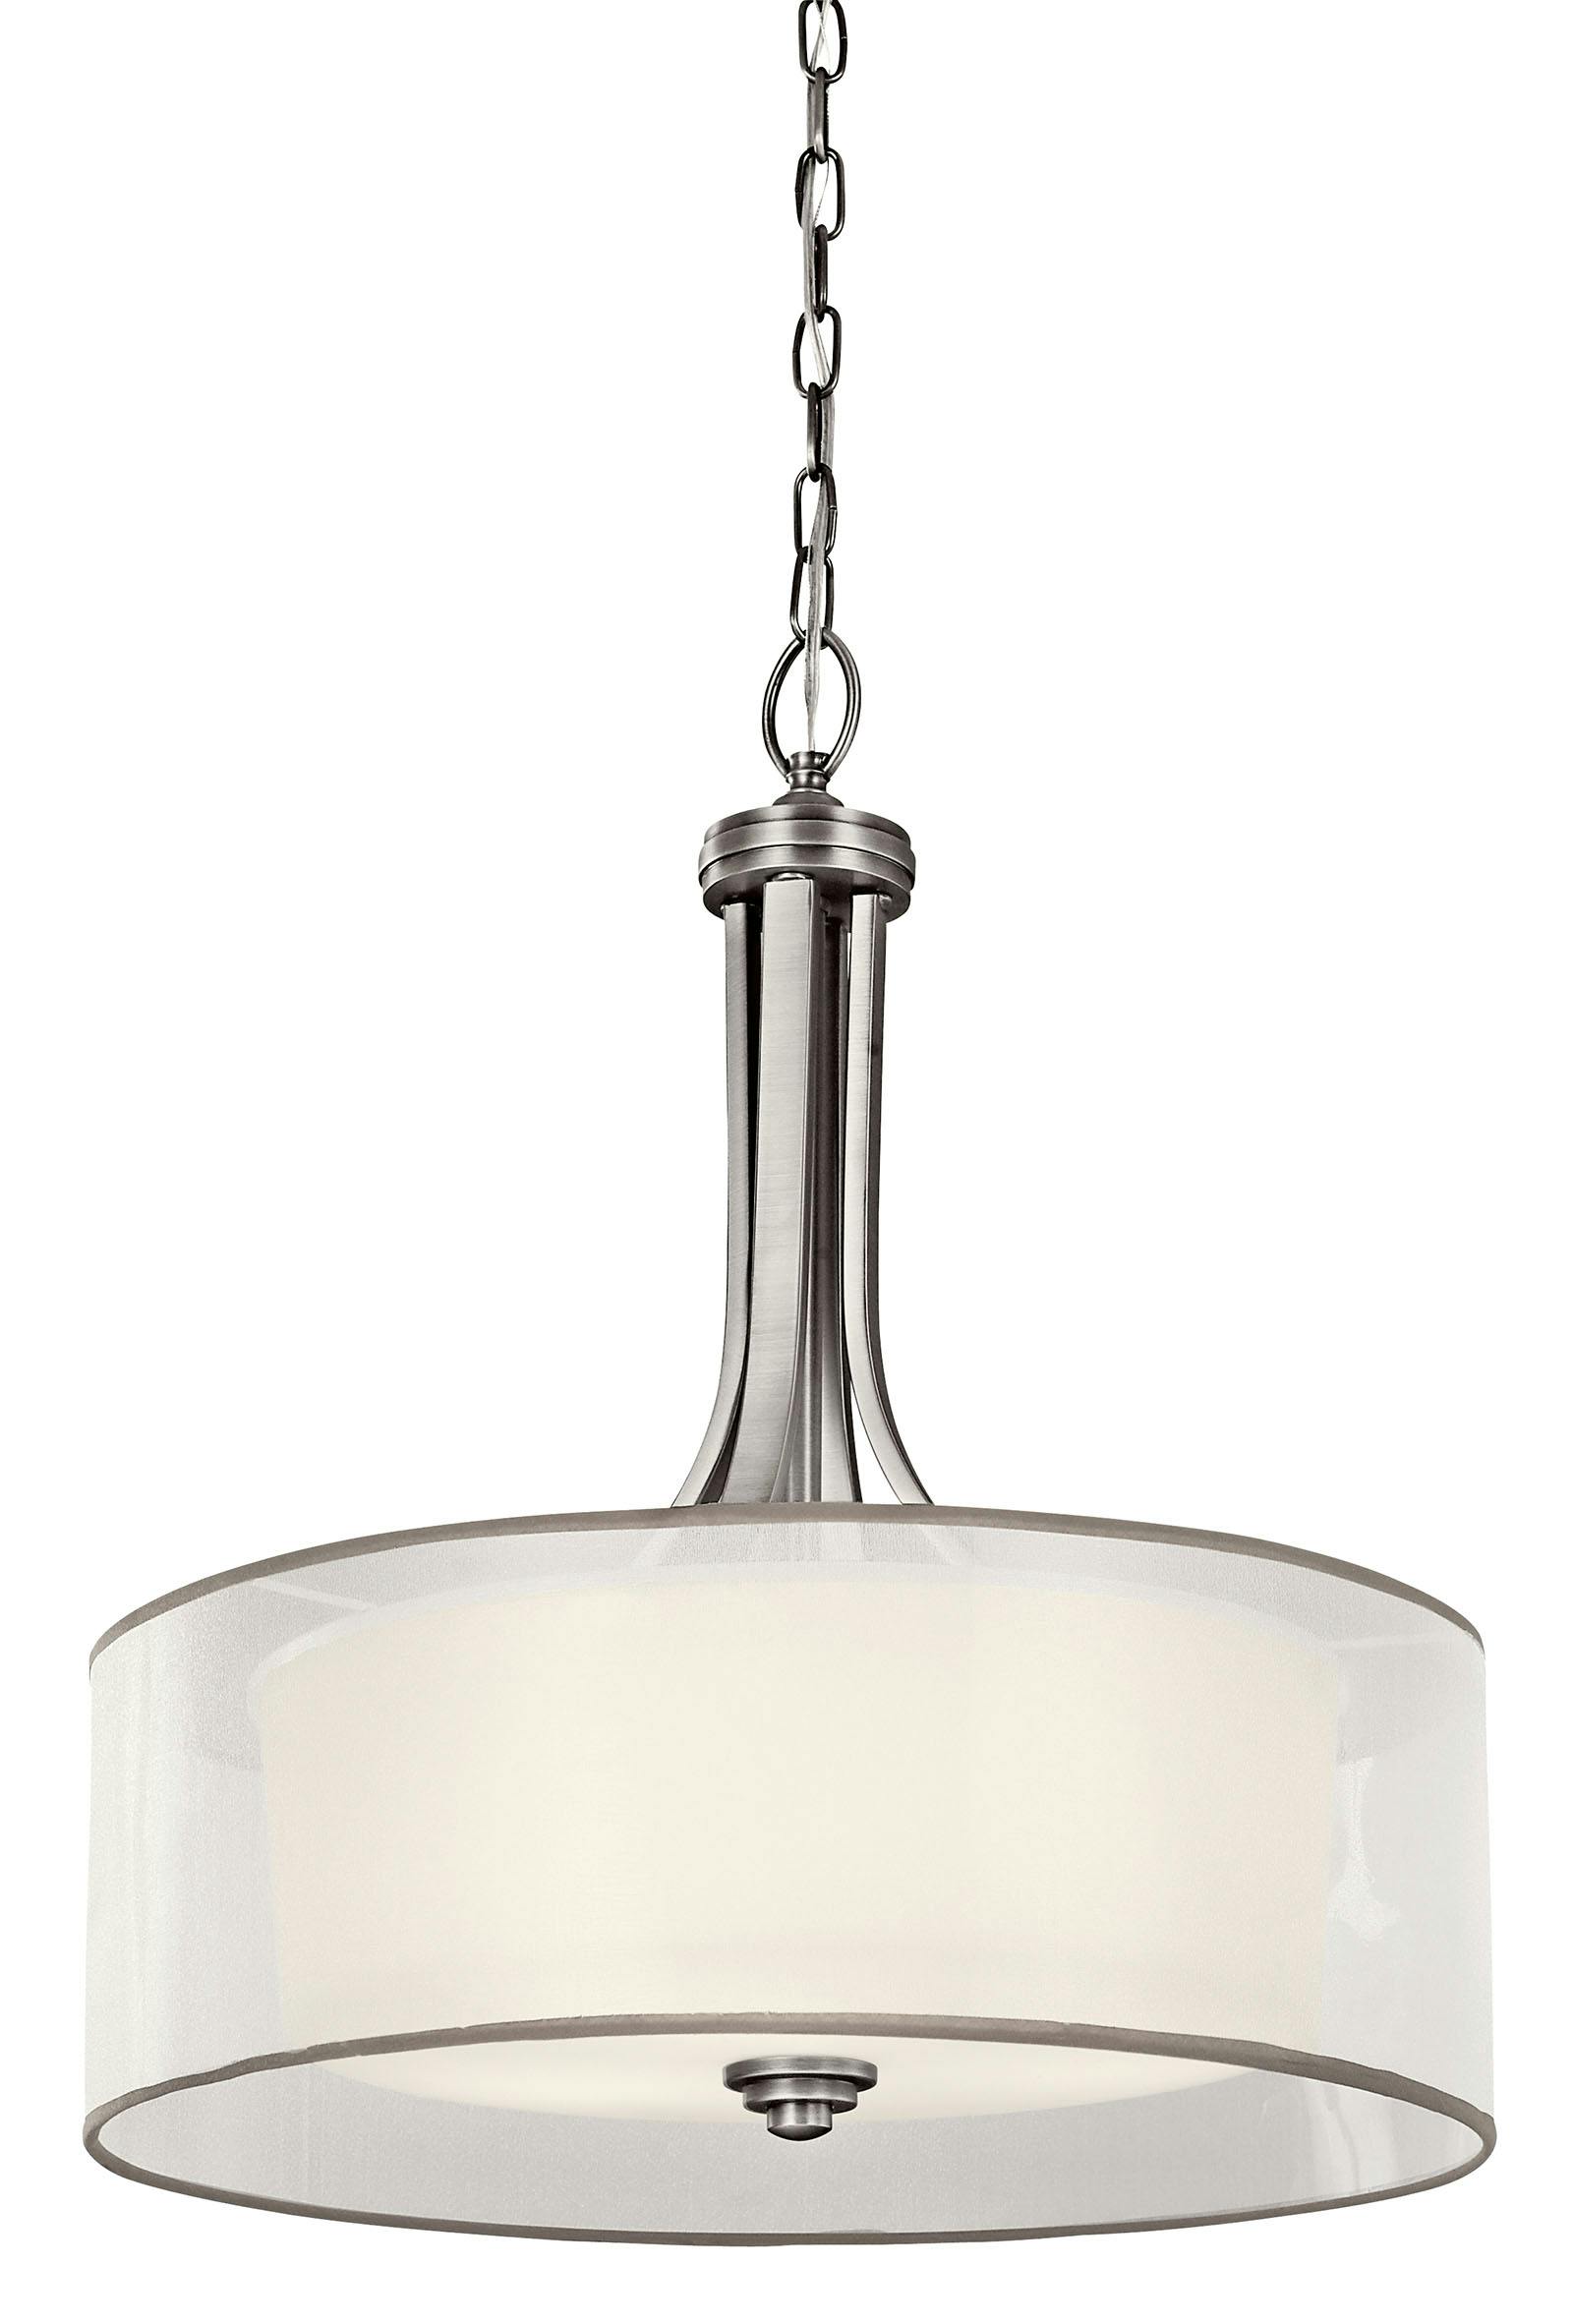 Lacey 23.5" 4 Light Pendant in Pewter on a white background